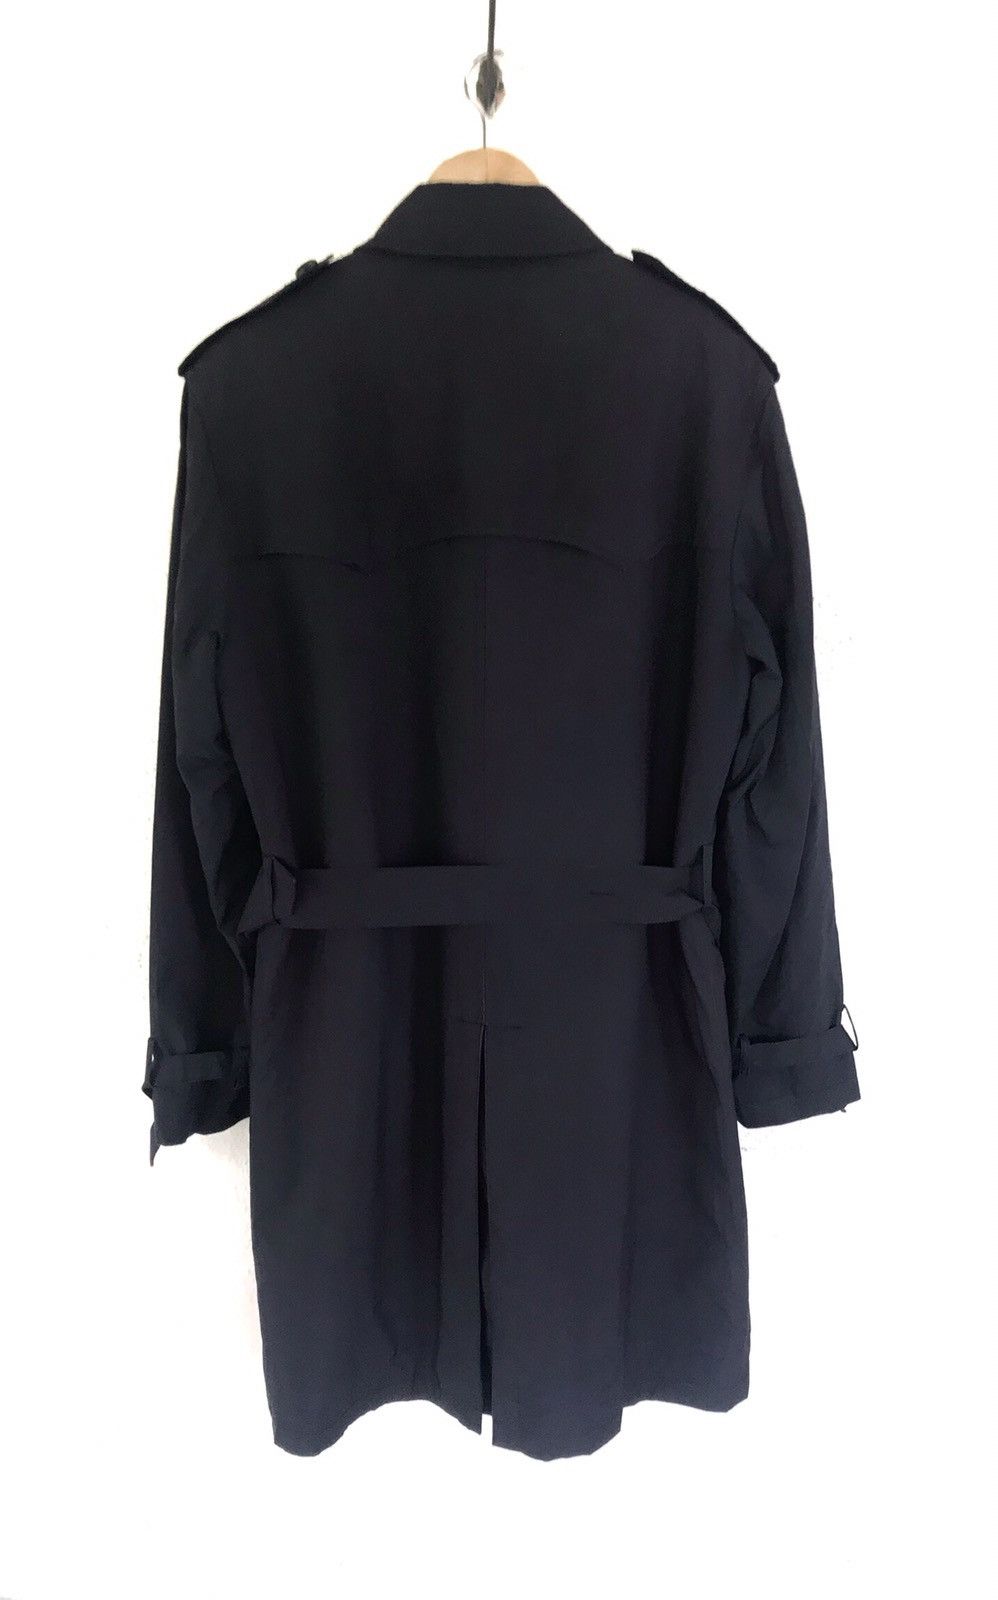 Paul Smith Collection Trench Coat - 7